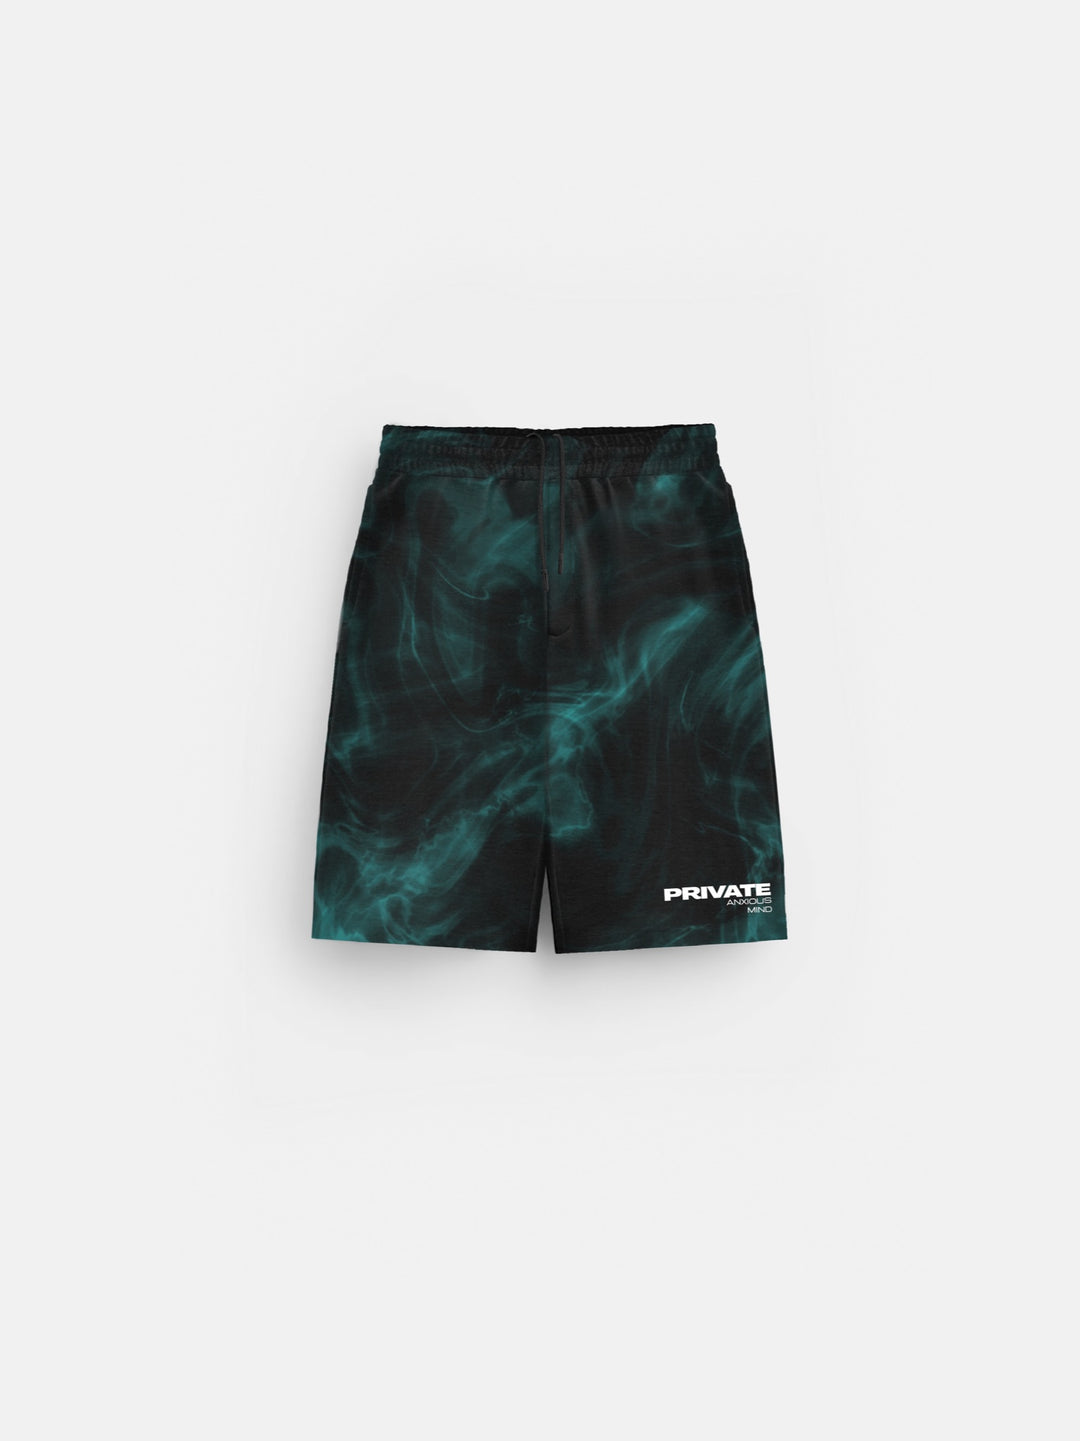 Oversize Private Smoke Shorts - Black and Petrol